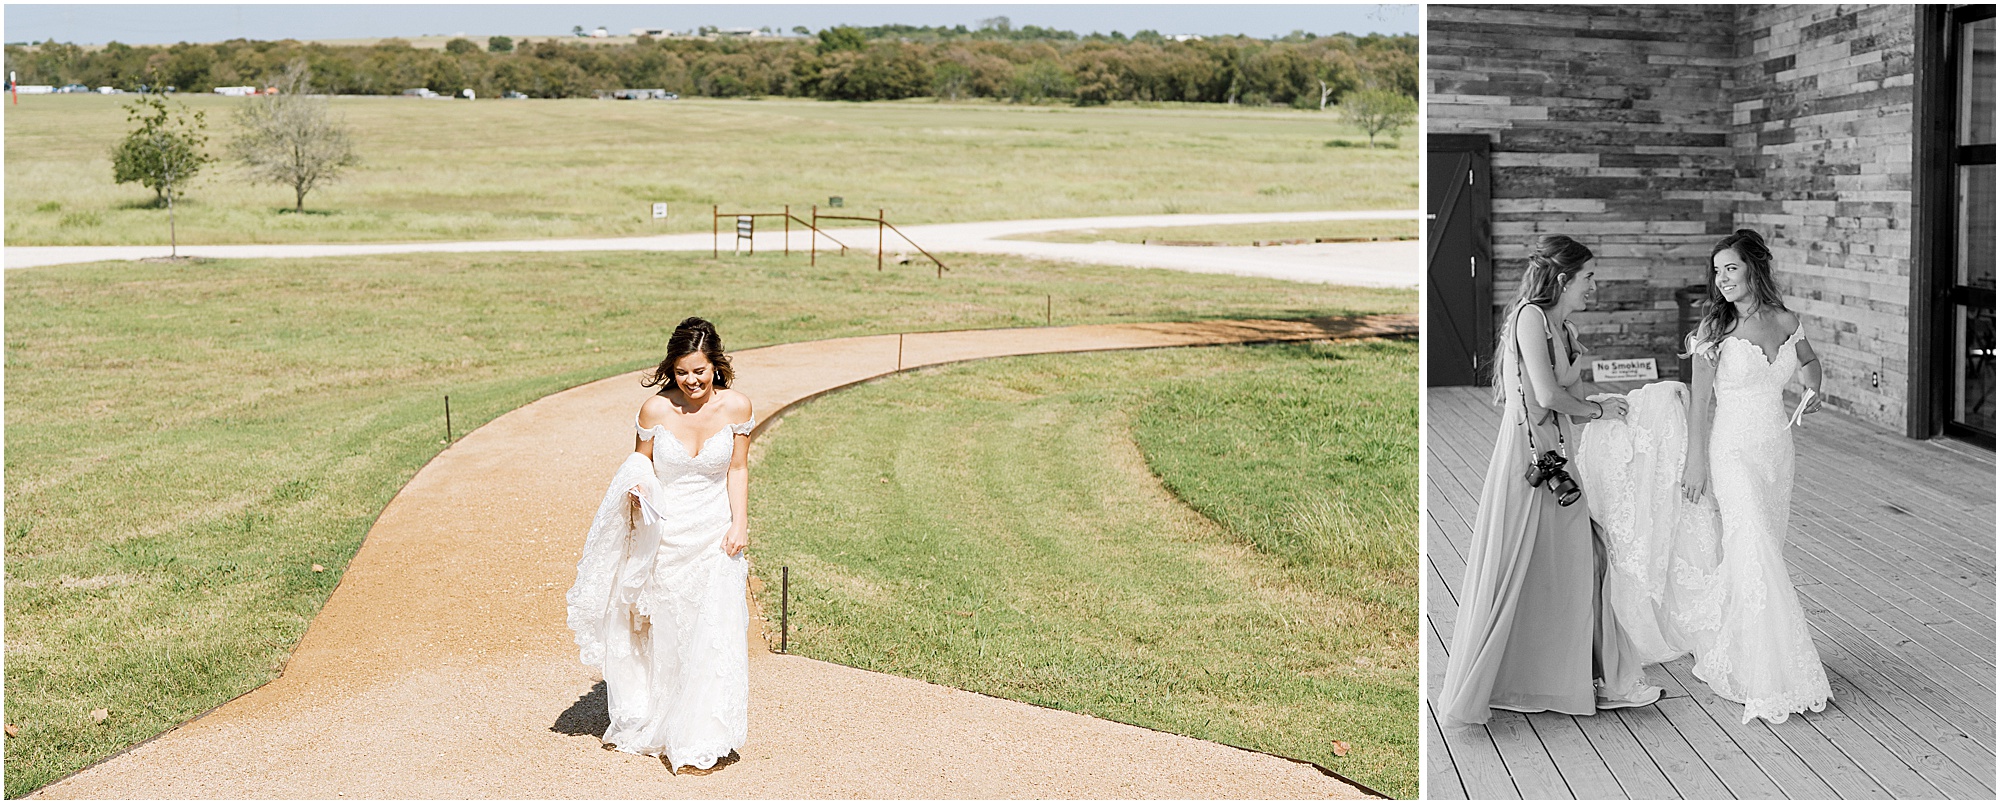 Austin, Texas Wedding Venues | Two Wishes Ranch | Two Wishes Ranch Wedding | Austin, Texas | Summer Wedding Color Palette | Summer Wedding Inspiration | Summer Wedding Colors | Austin Wedding Photographer | Fort Worth Wedding Photographer | Dallas Wedding Photographer | Bailee Bruce Photography 